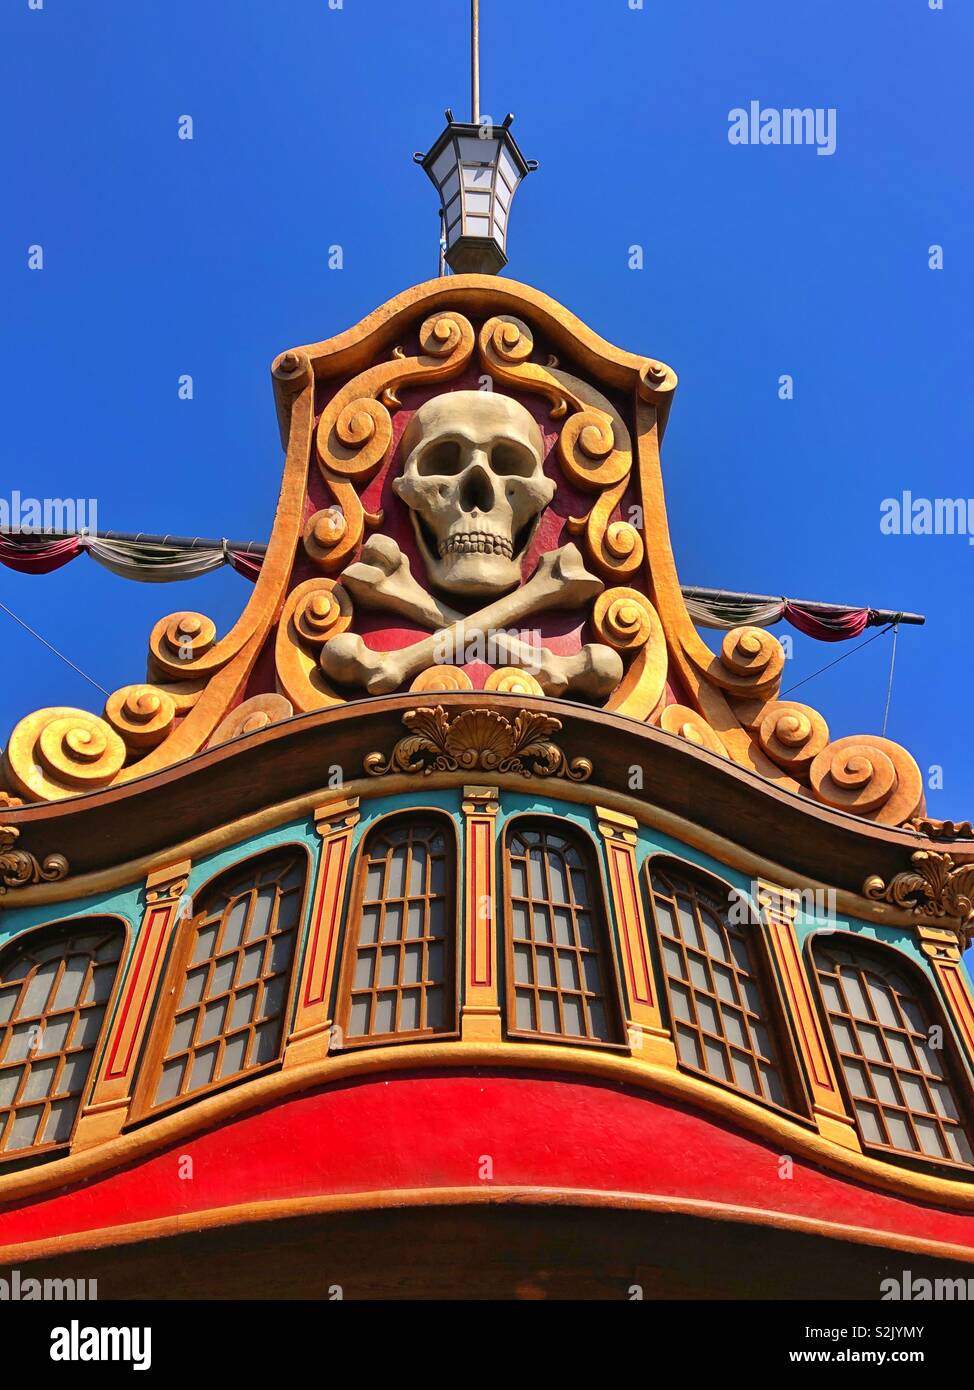 https://c8.alamy.com/comp/S2JYMY/pirate-ship-from-pirates-of-the-caribbean-at-disneyland-paris-S2JYMY.jpg